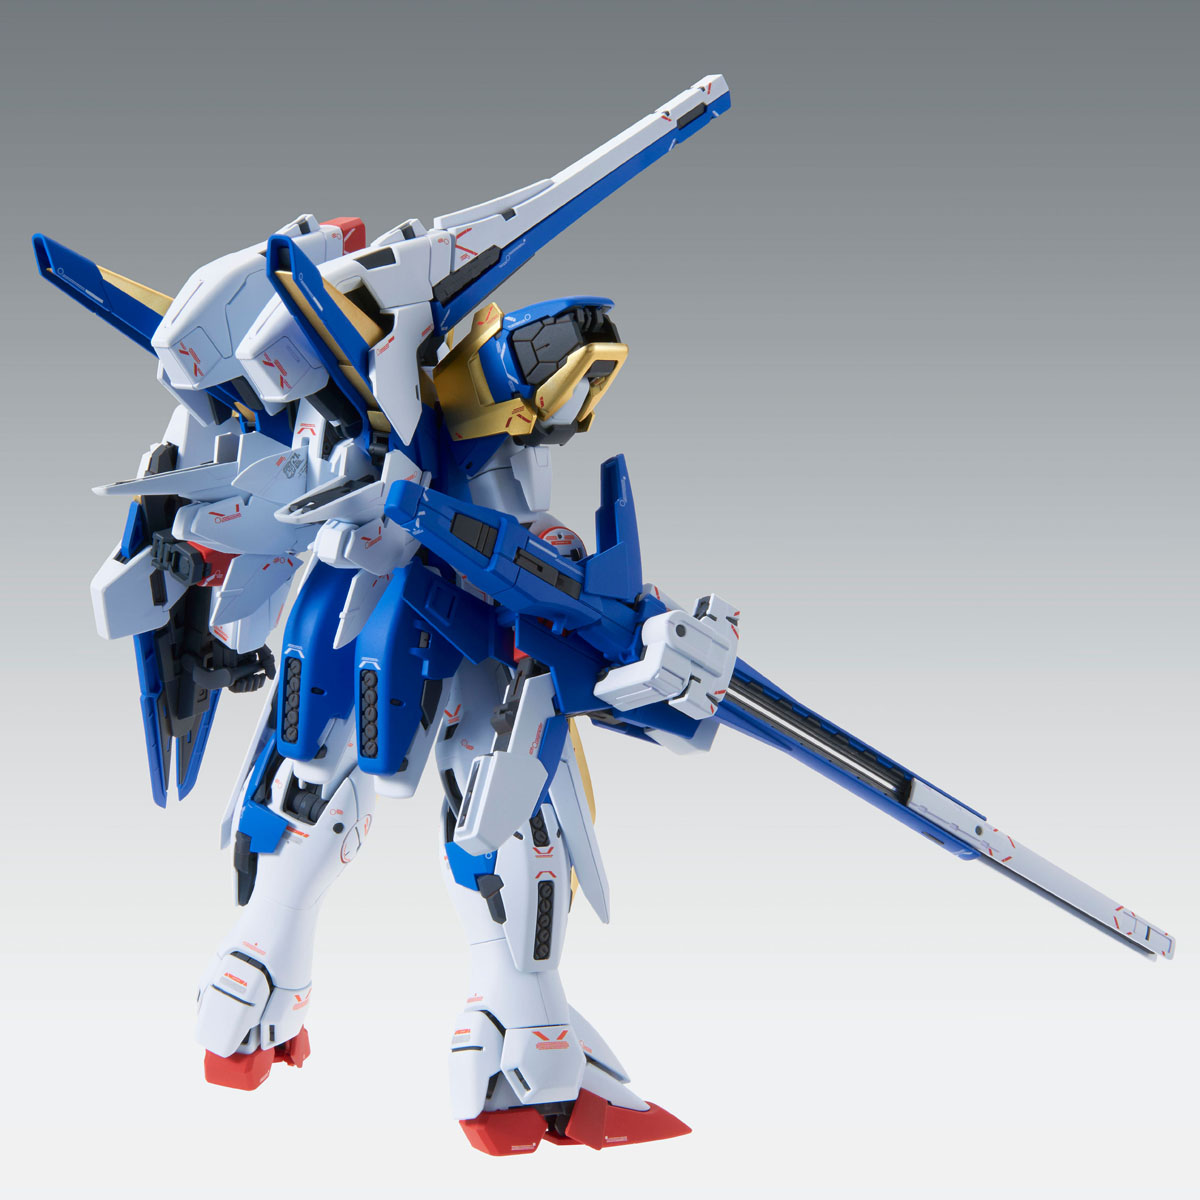  MG 1/100 VICTORY TWO ASSAULT BUSTER GUNDAM Ver.Ka [Sep 2020 Delivery]